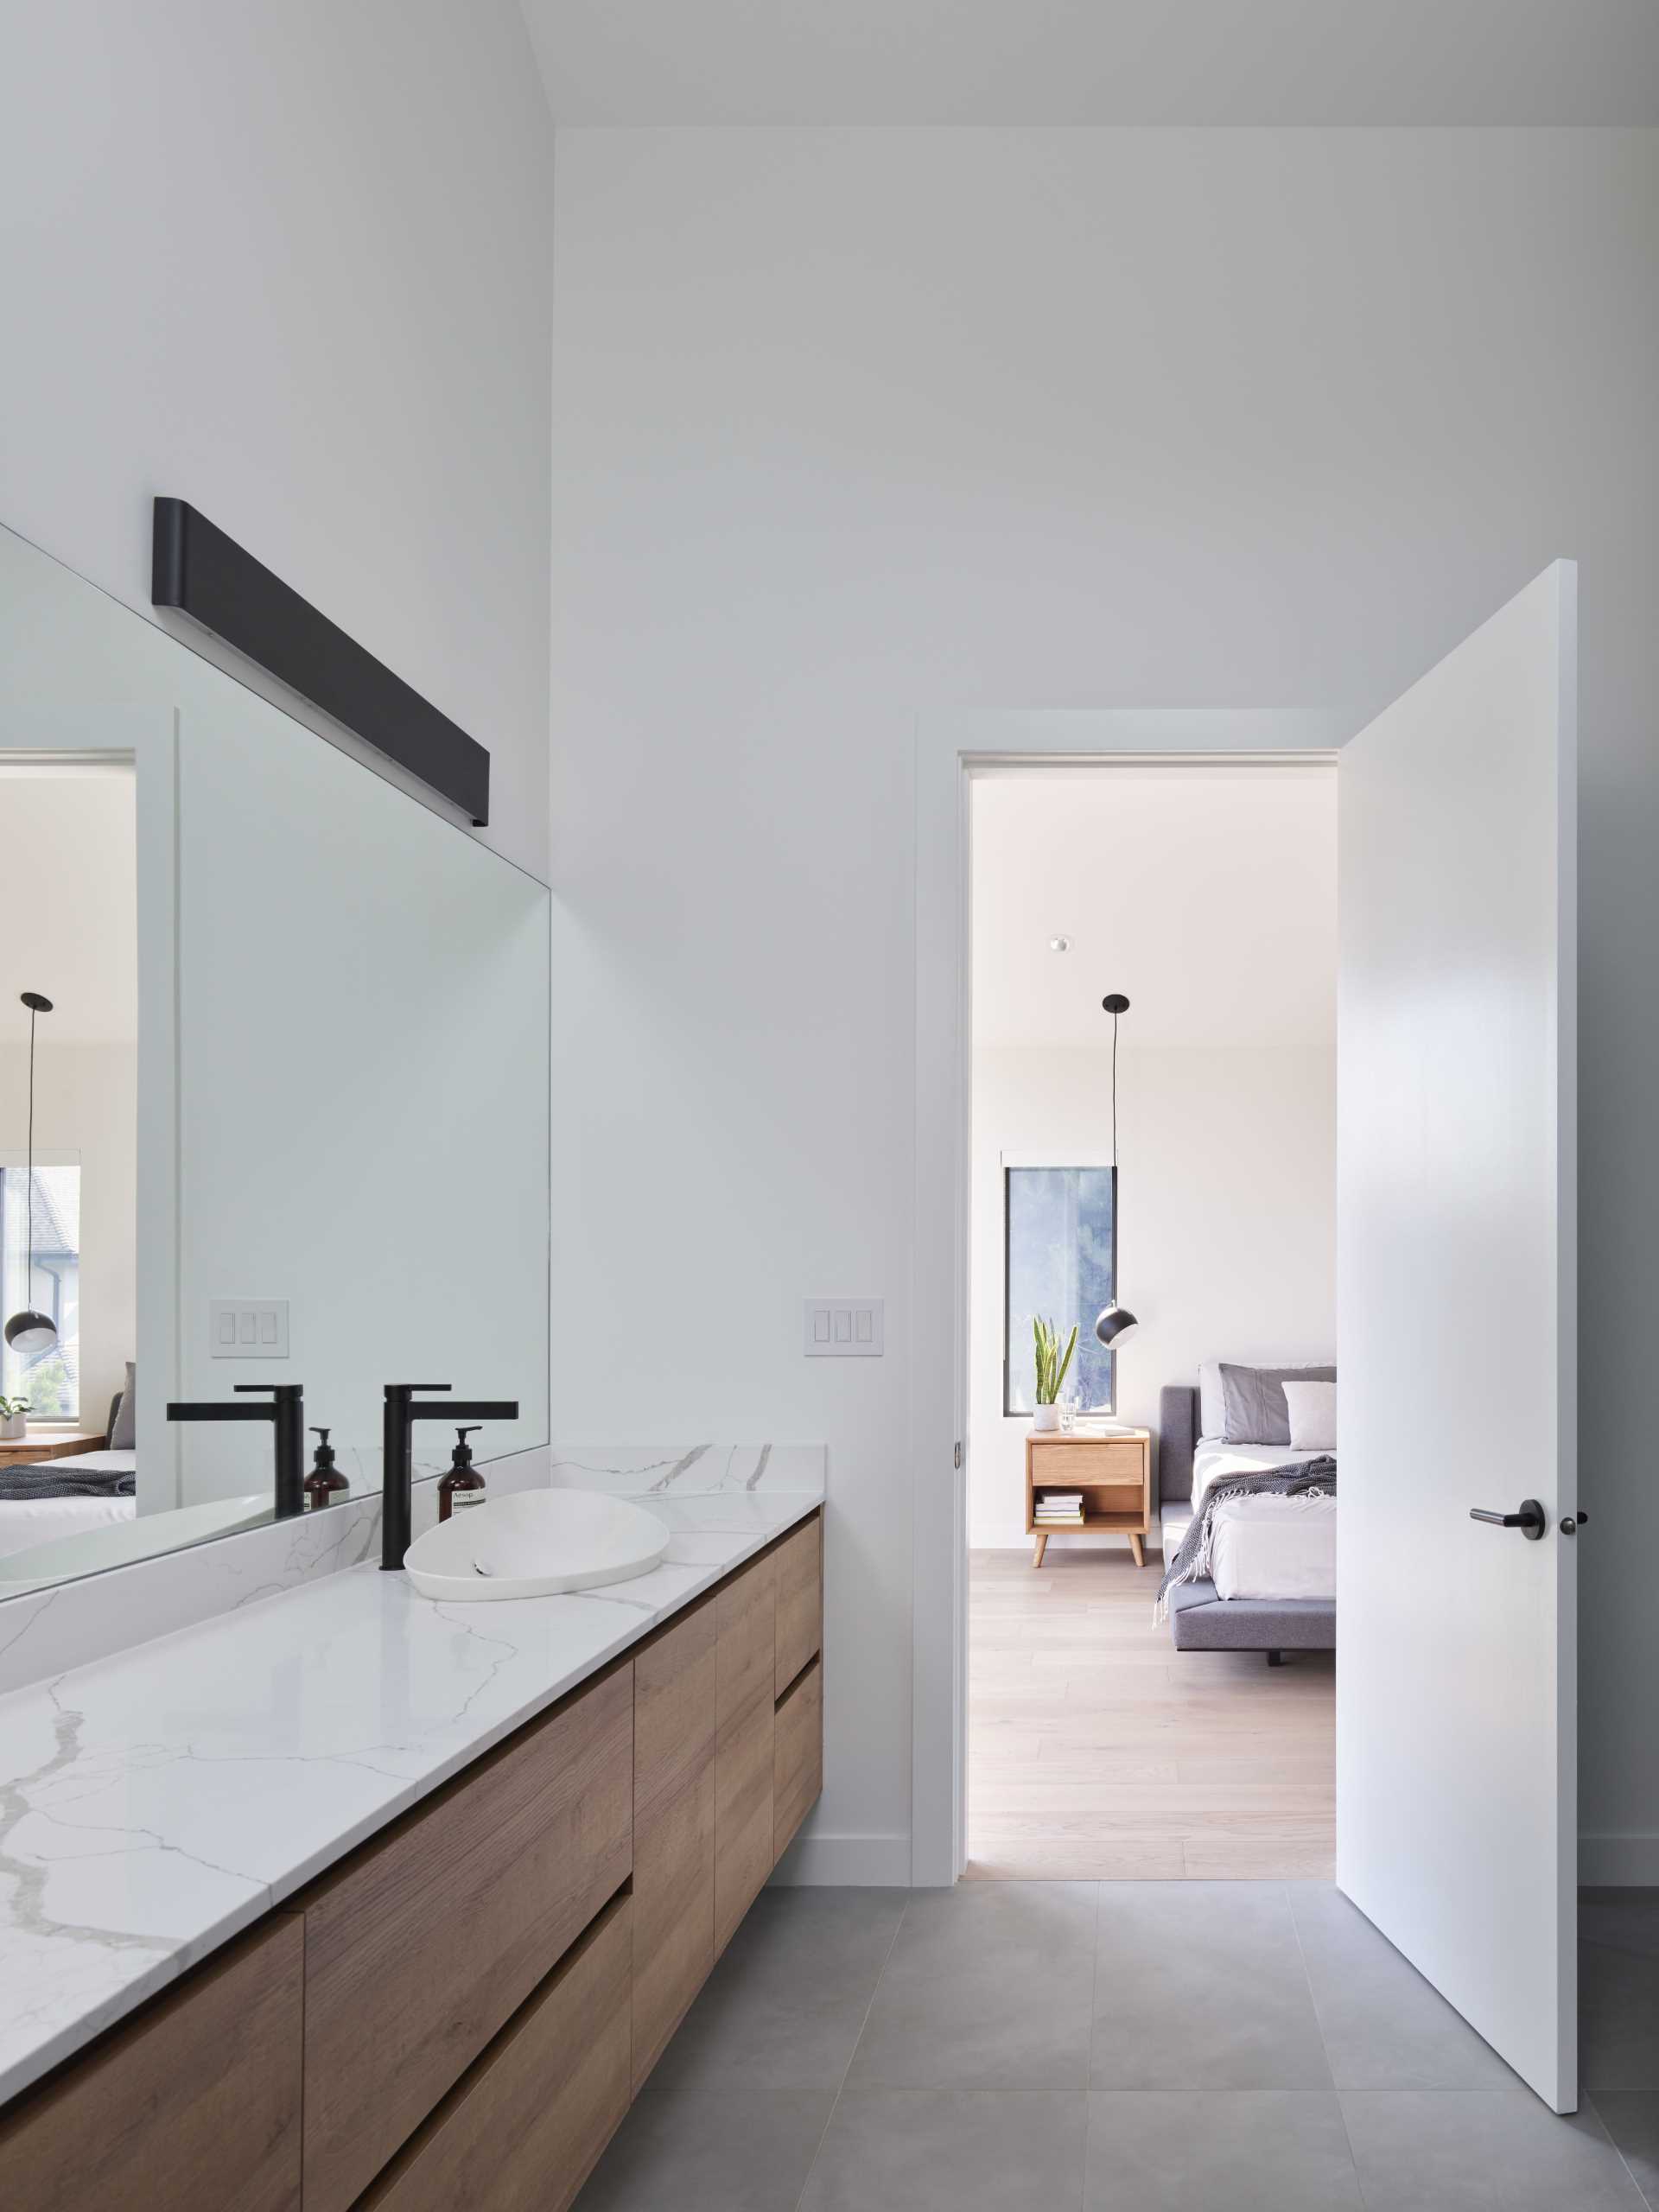 In this modern en-suite bathroom, there's a double vanity, a glass-enclosed walk-in shower, and a freestanding bathtub by the window.